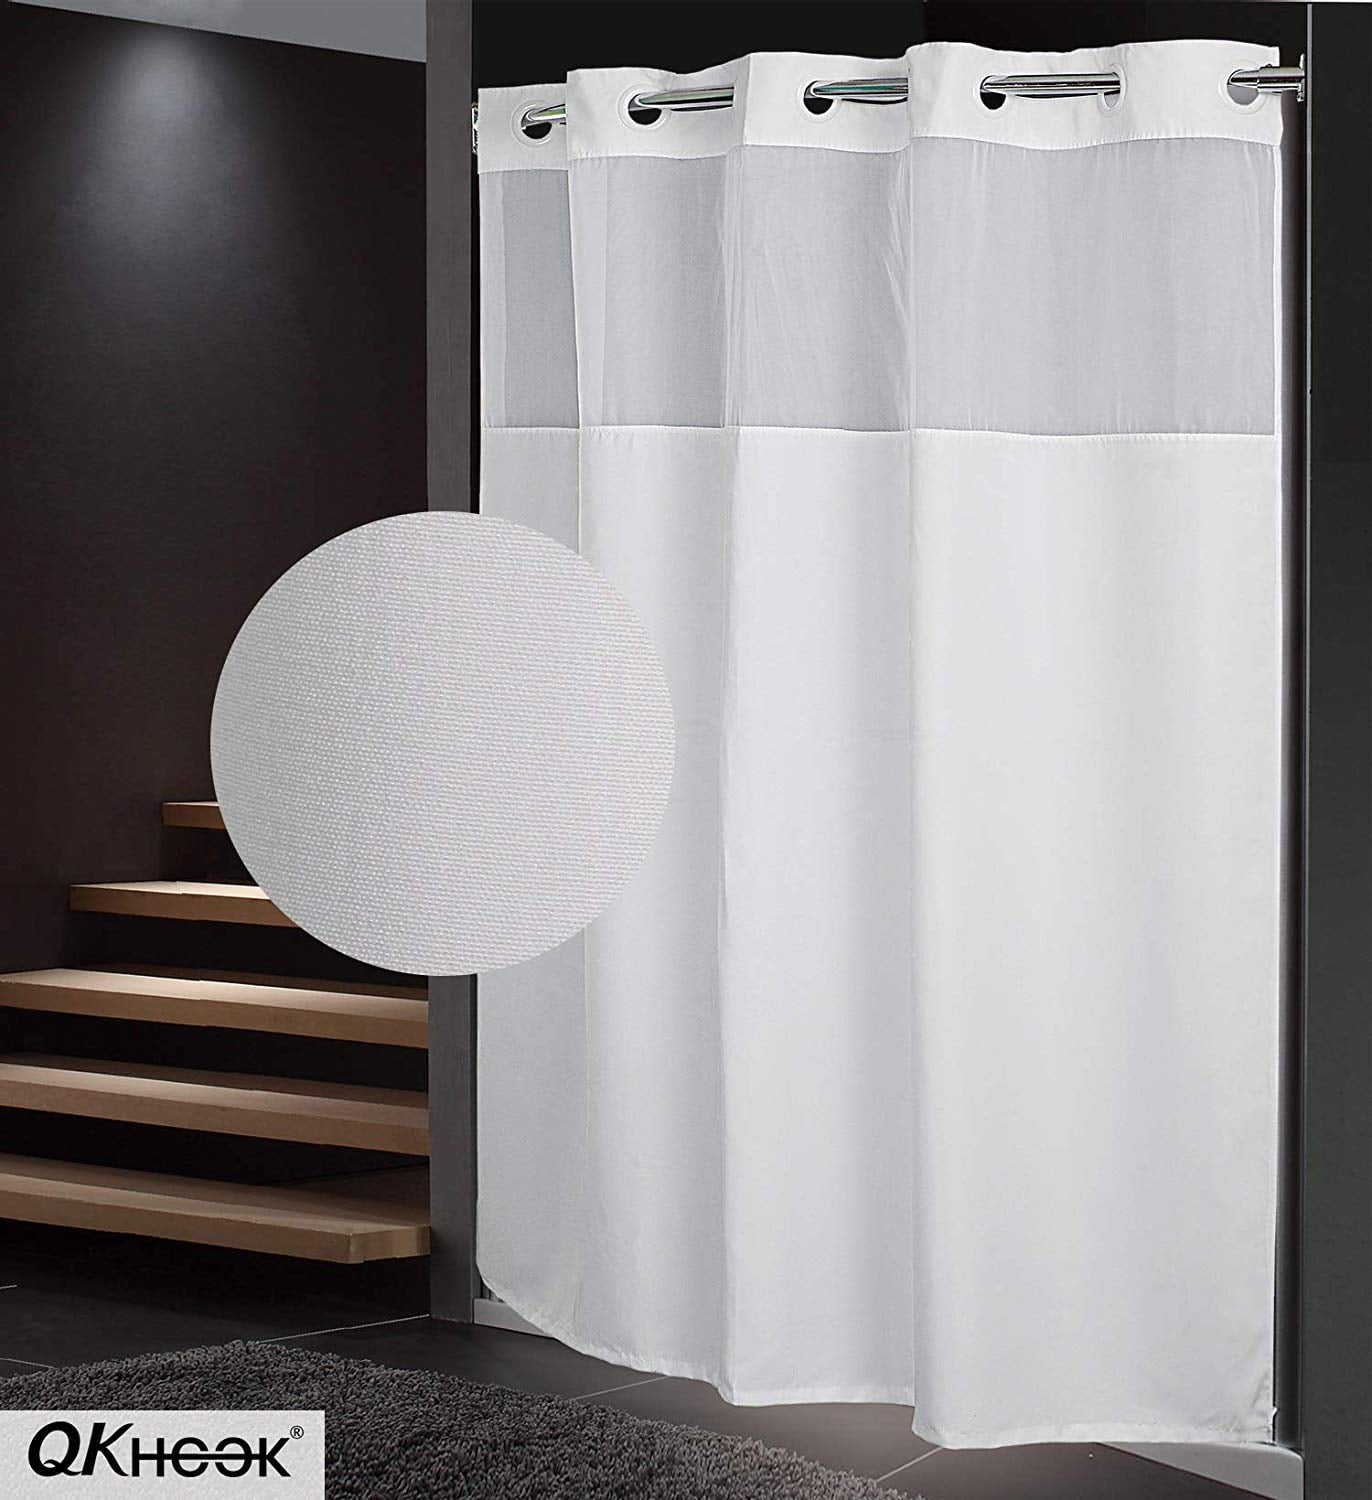 Qkhook Hookless Shower Curtain With, White Hookless Shower Curtain